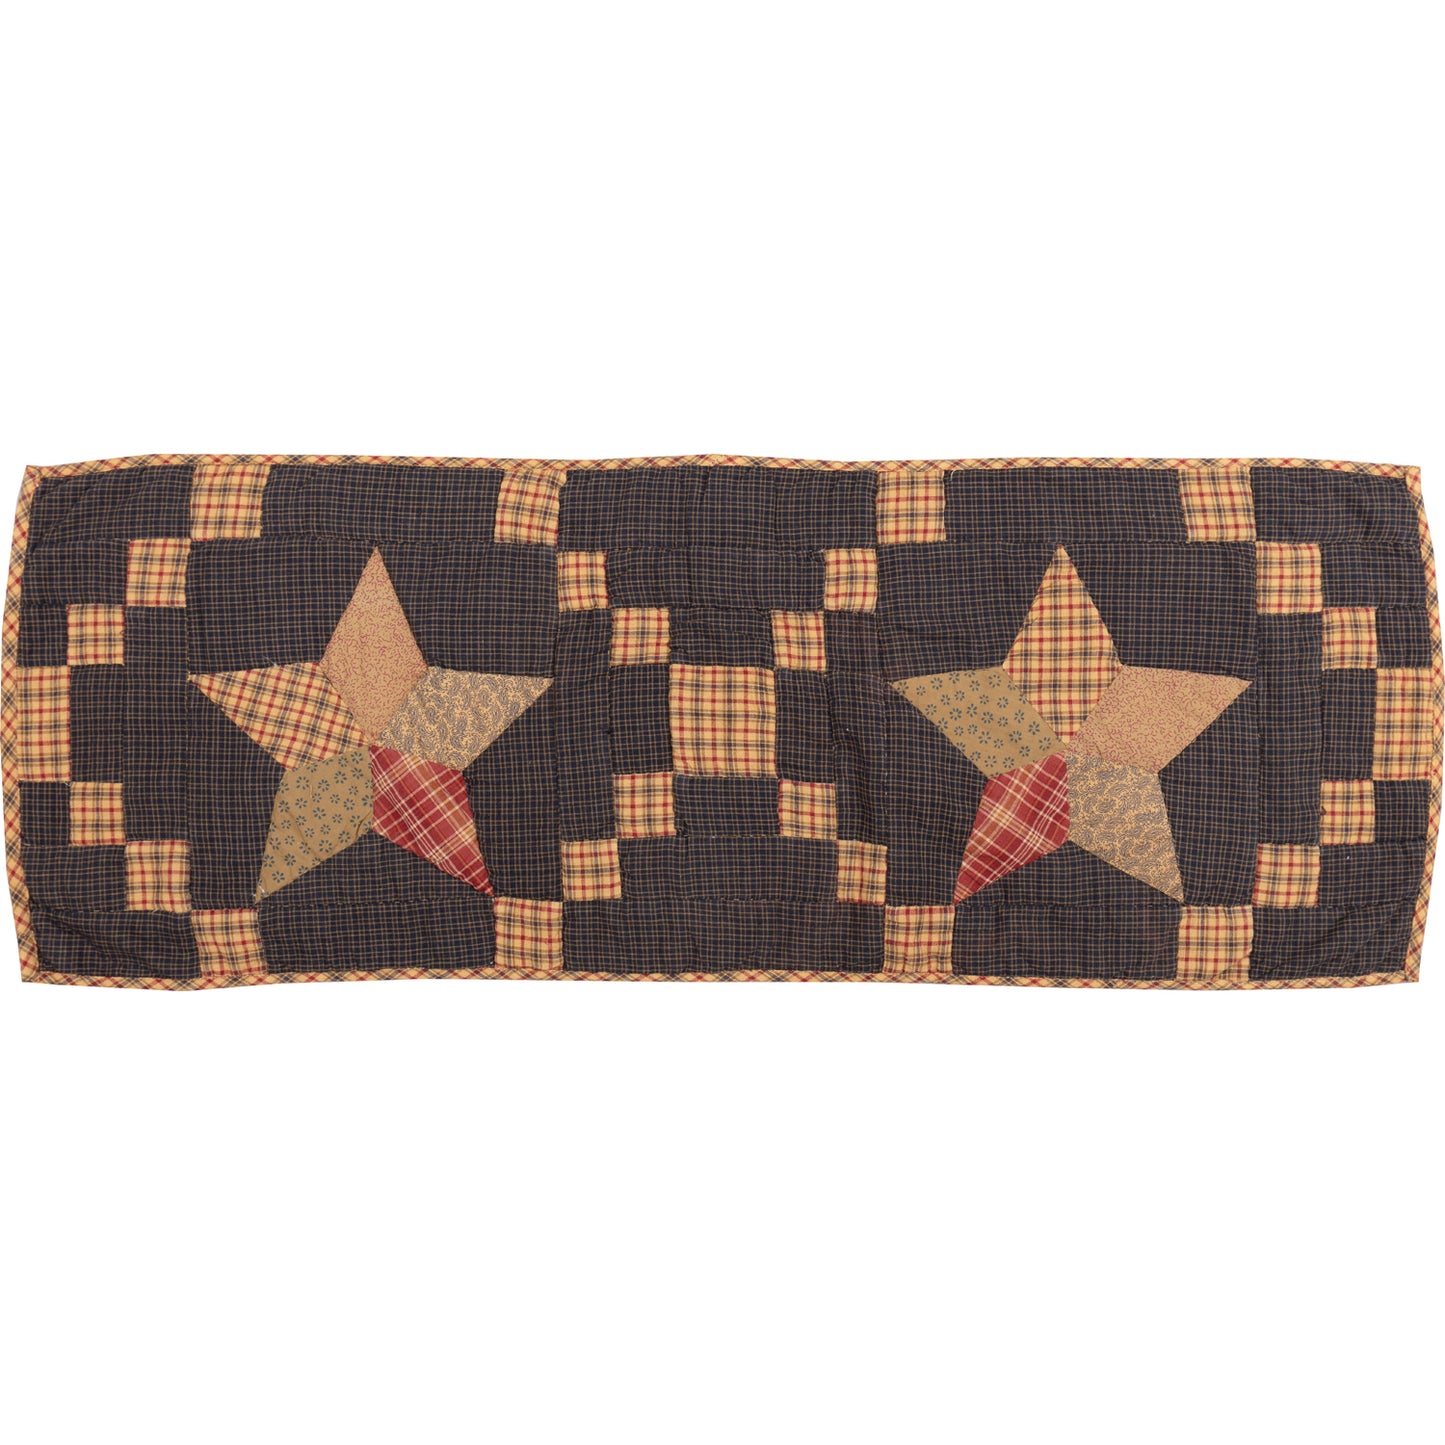 12274-Arlington-Runner-Quilted-Patchwork-Star-13x36-image-4